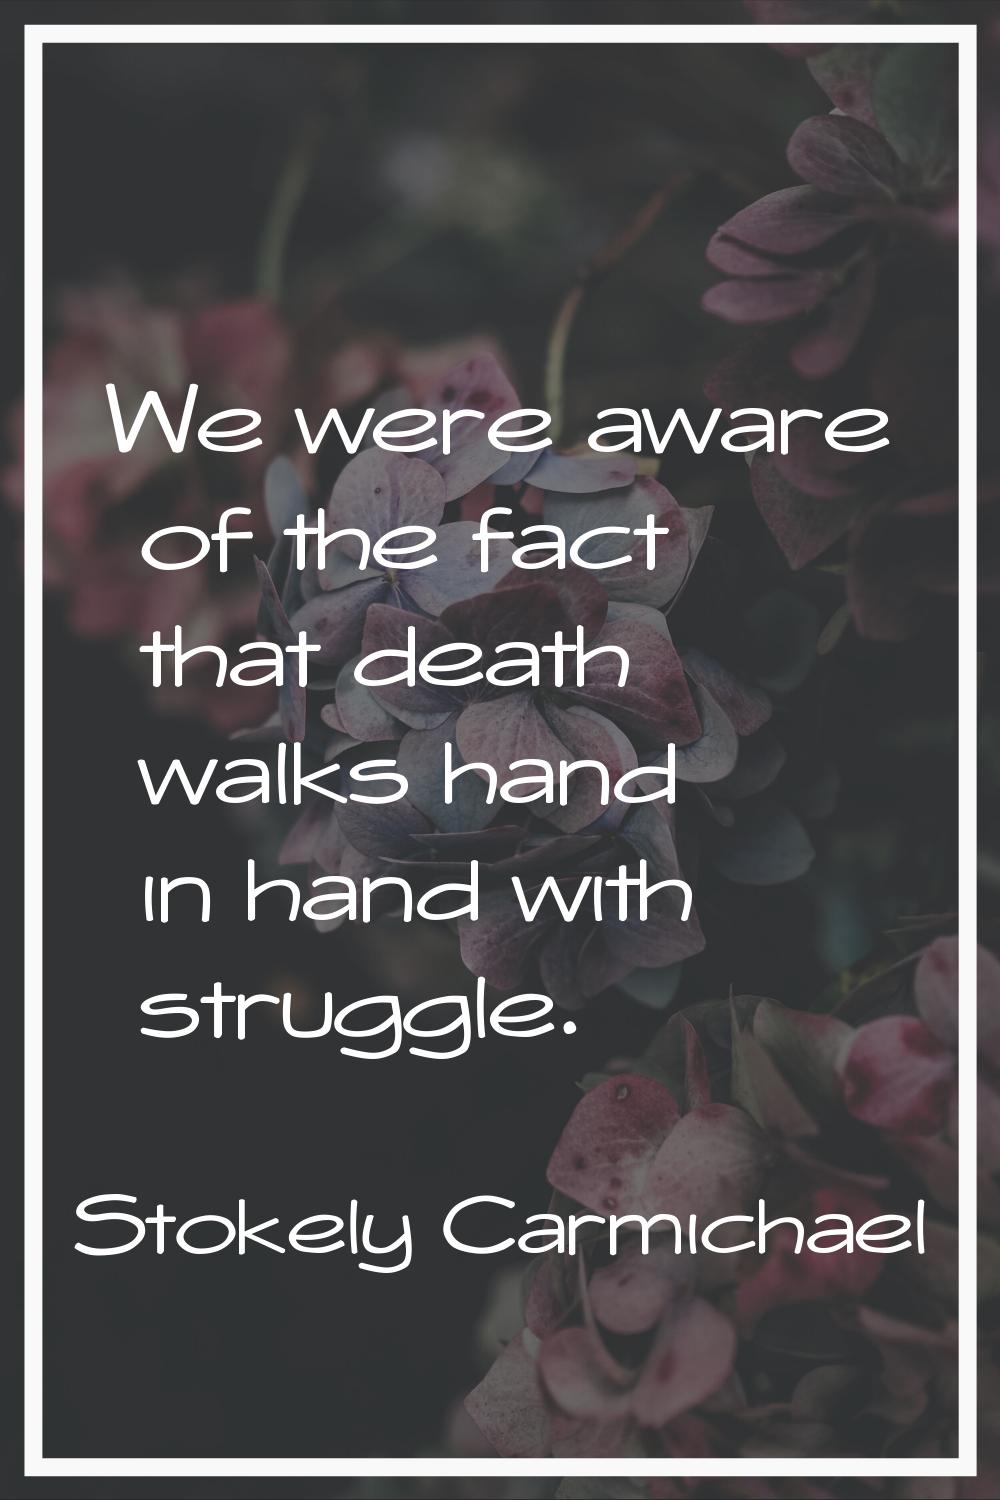 We were aware of the fact that death walks hand in hand with struggle.